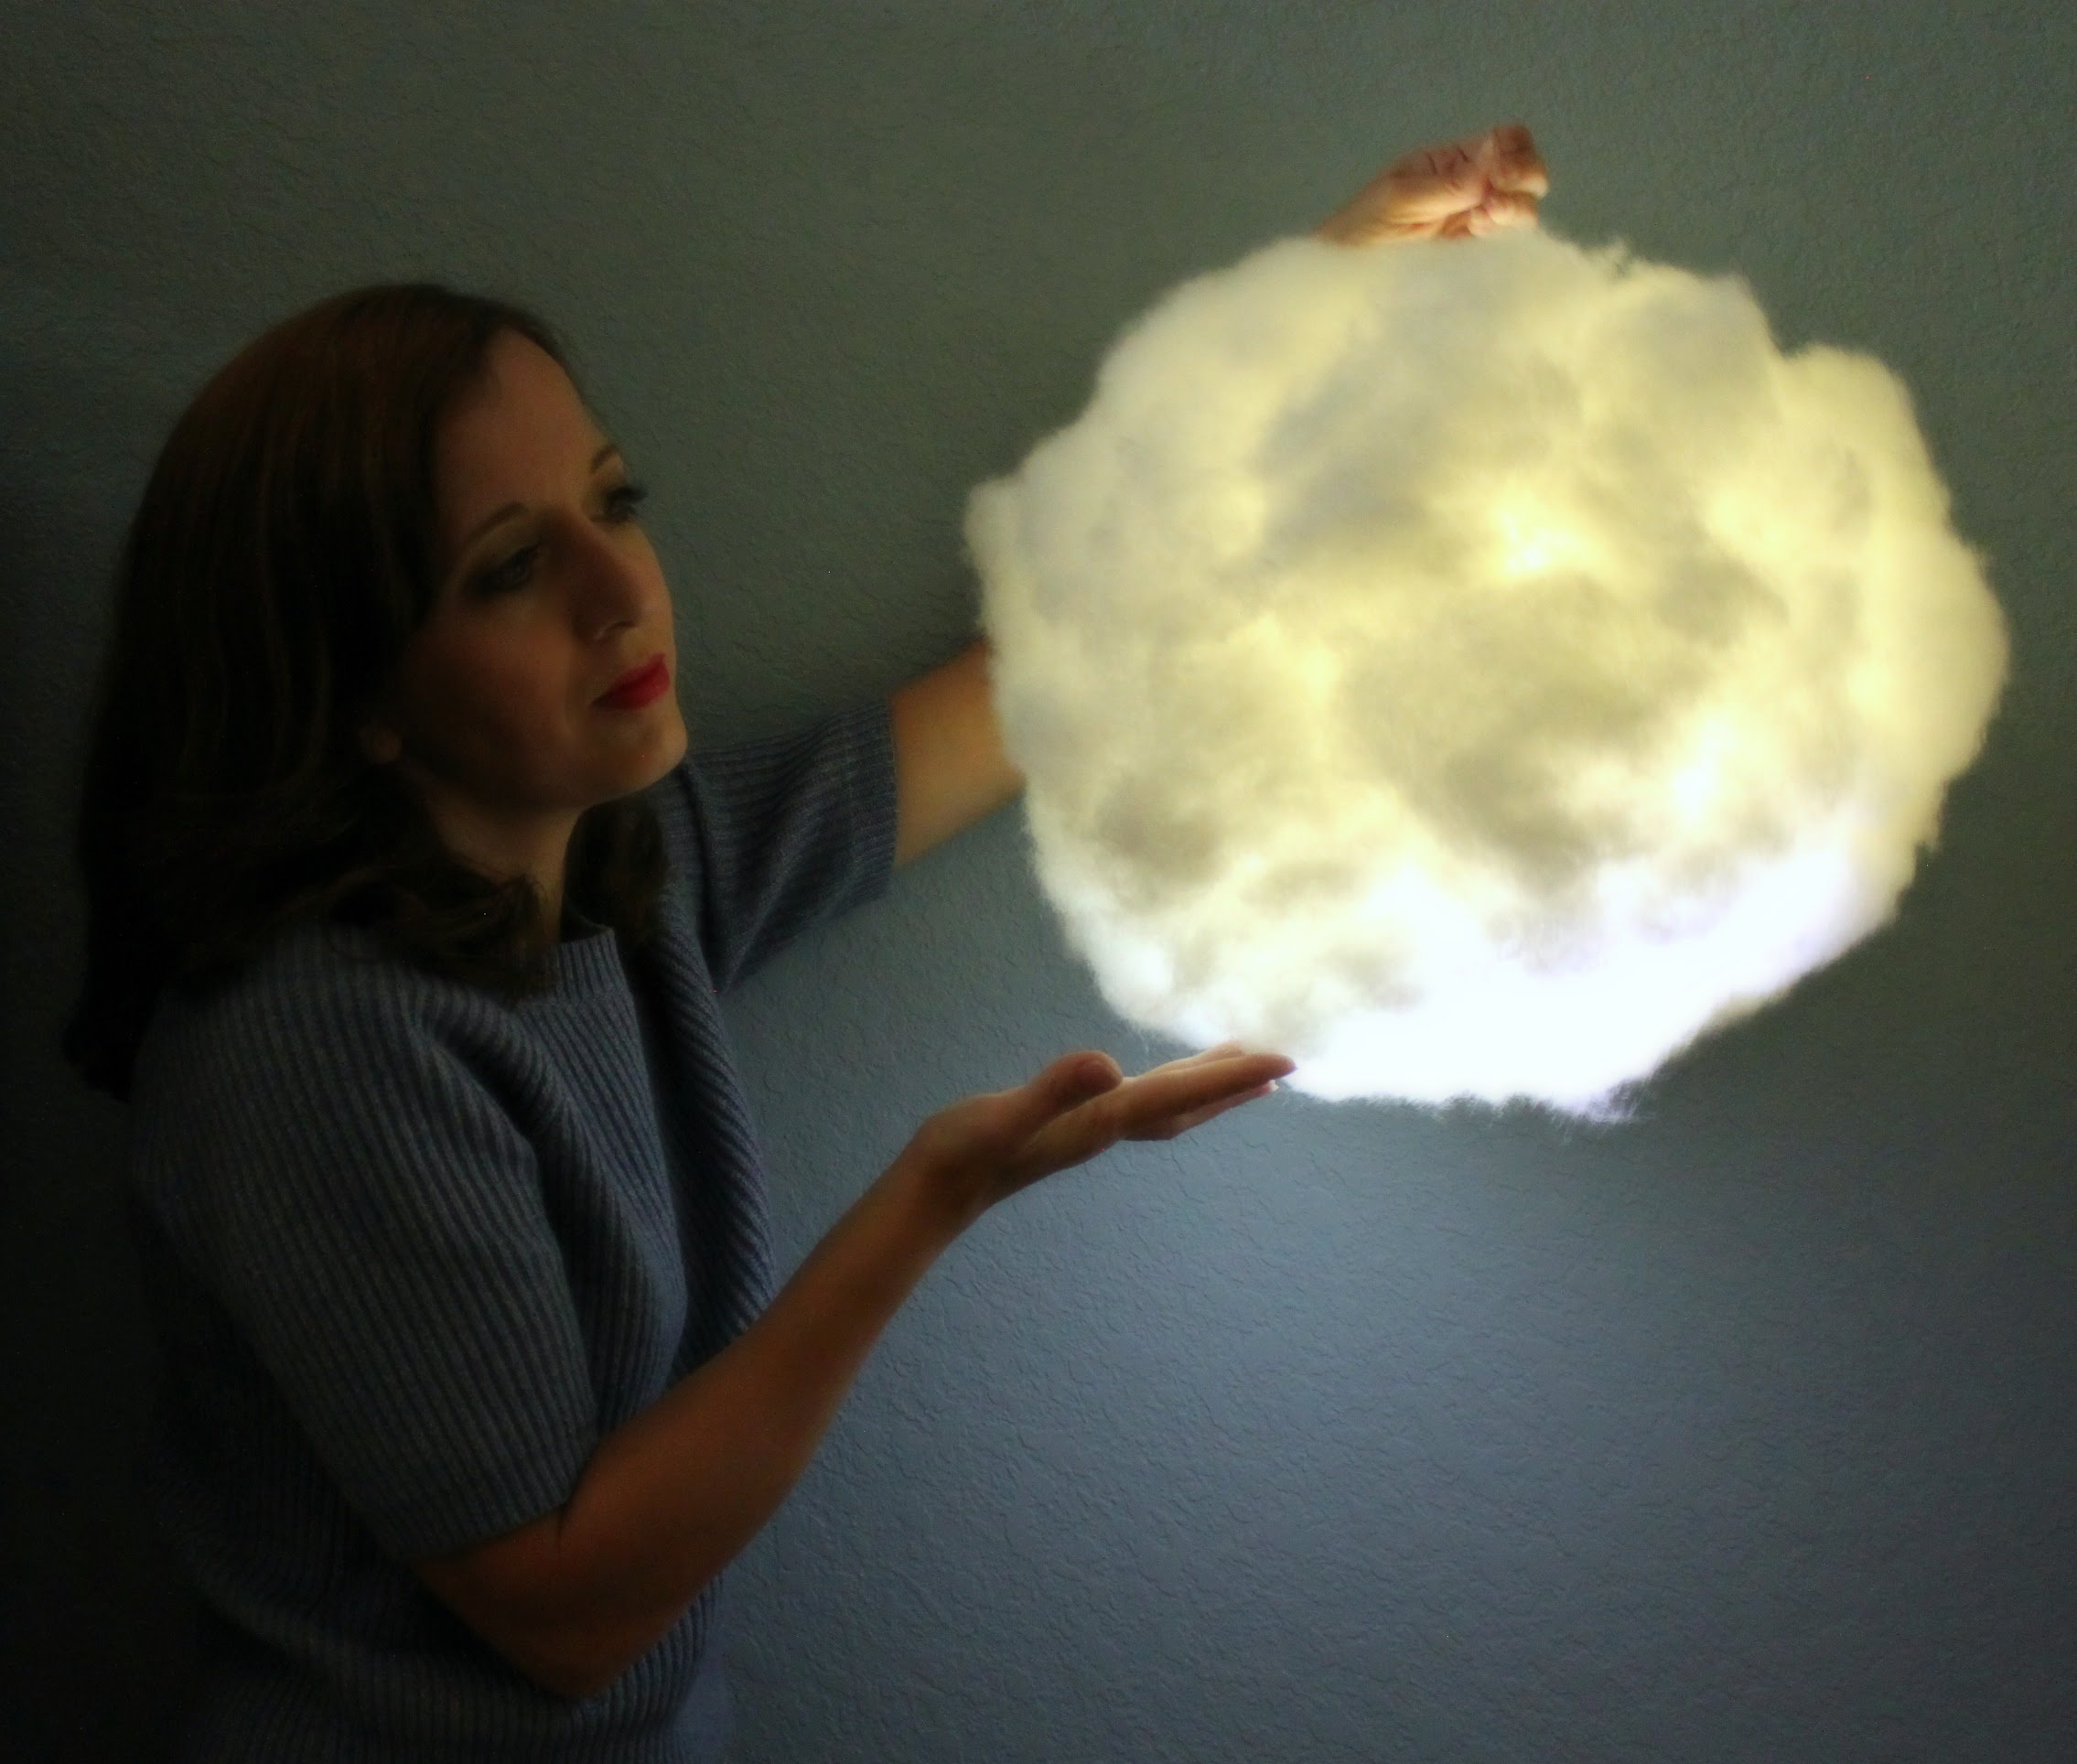 Make Your Own Glowing Cloud Light - YouTube